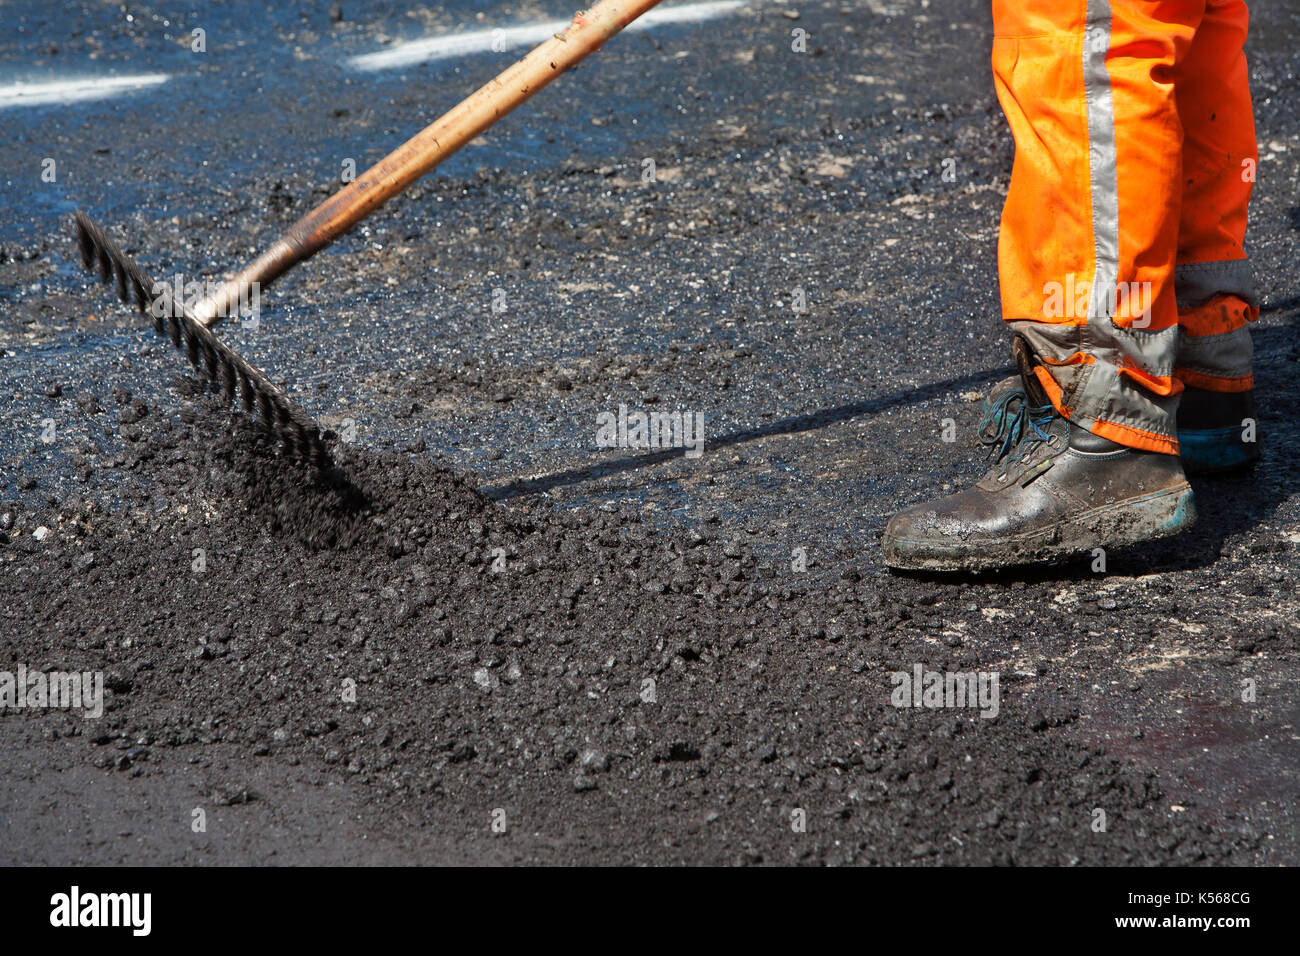 Manual worker leveling asphalt with a rake Stock Photo